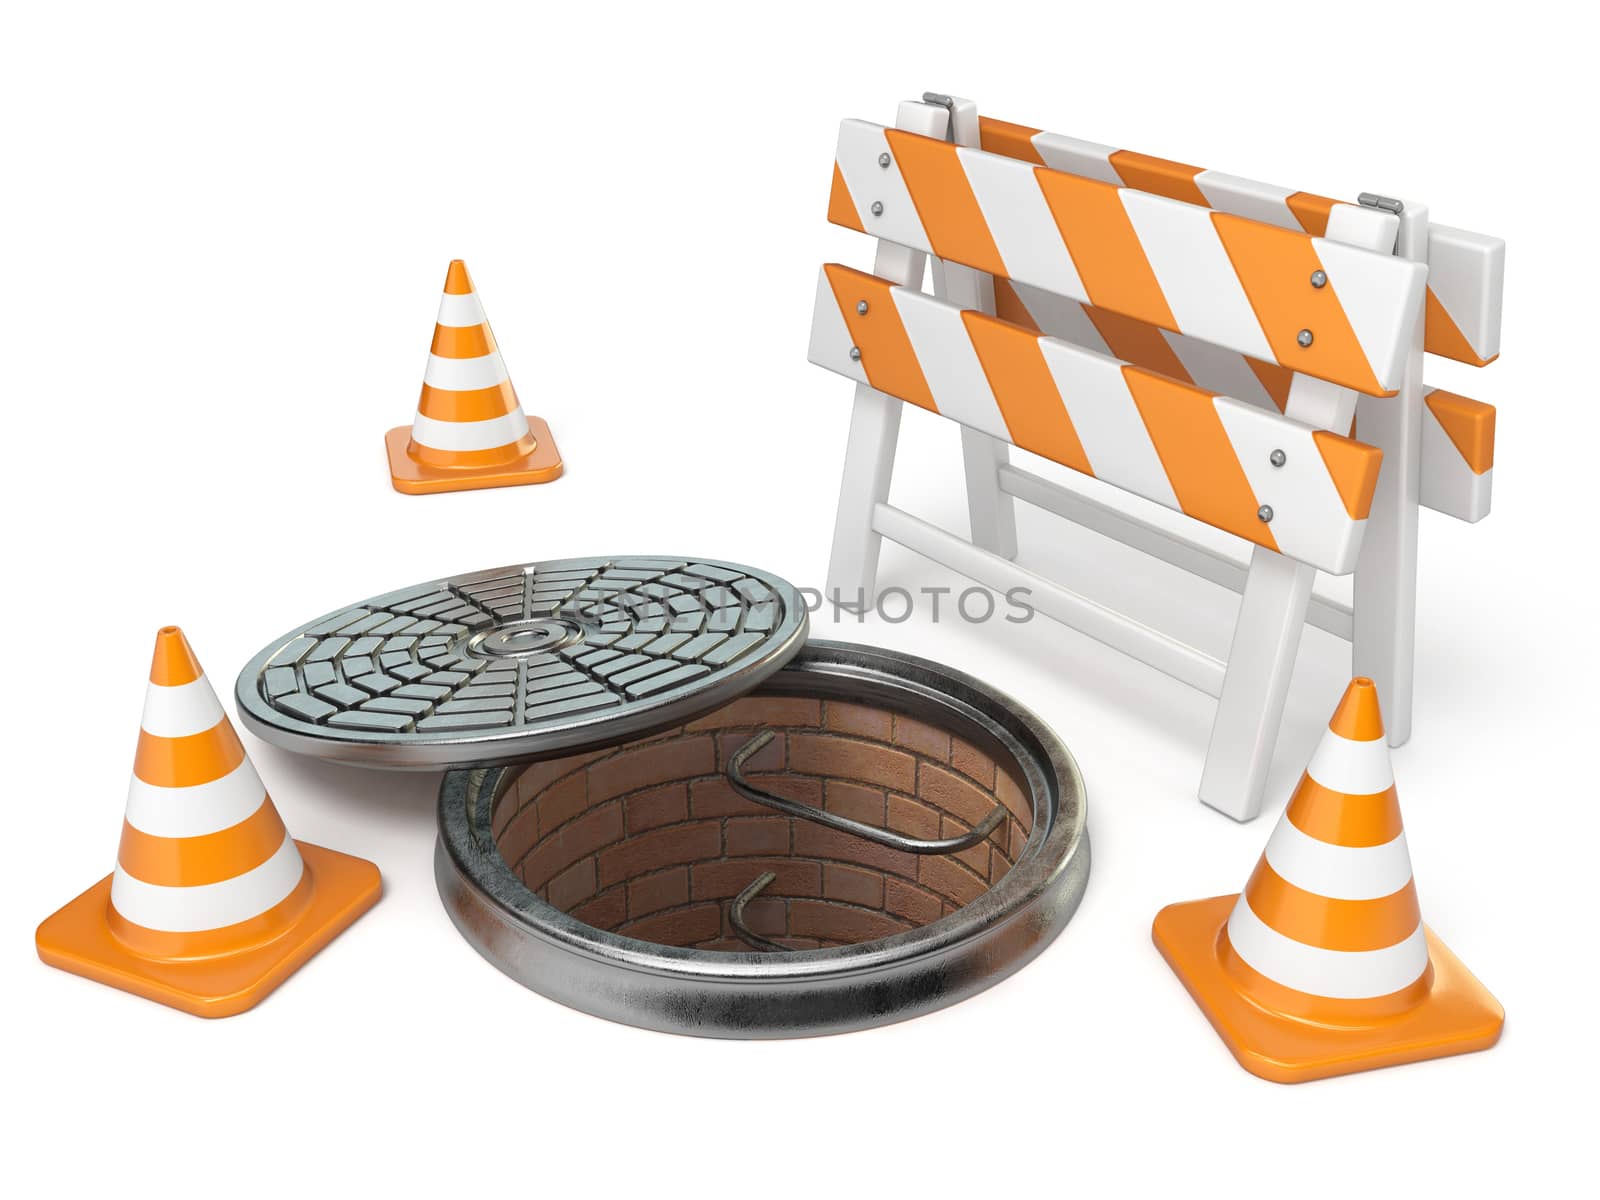 Manhole traffic cone and barrier 3D render illustration isolated on white background